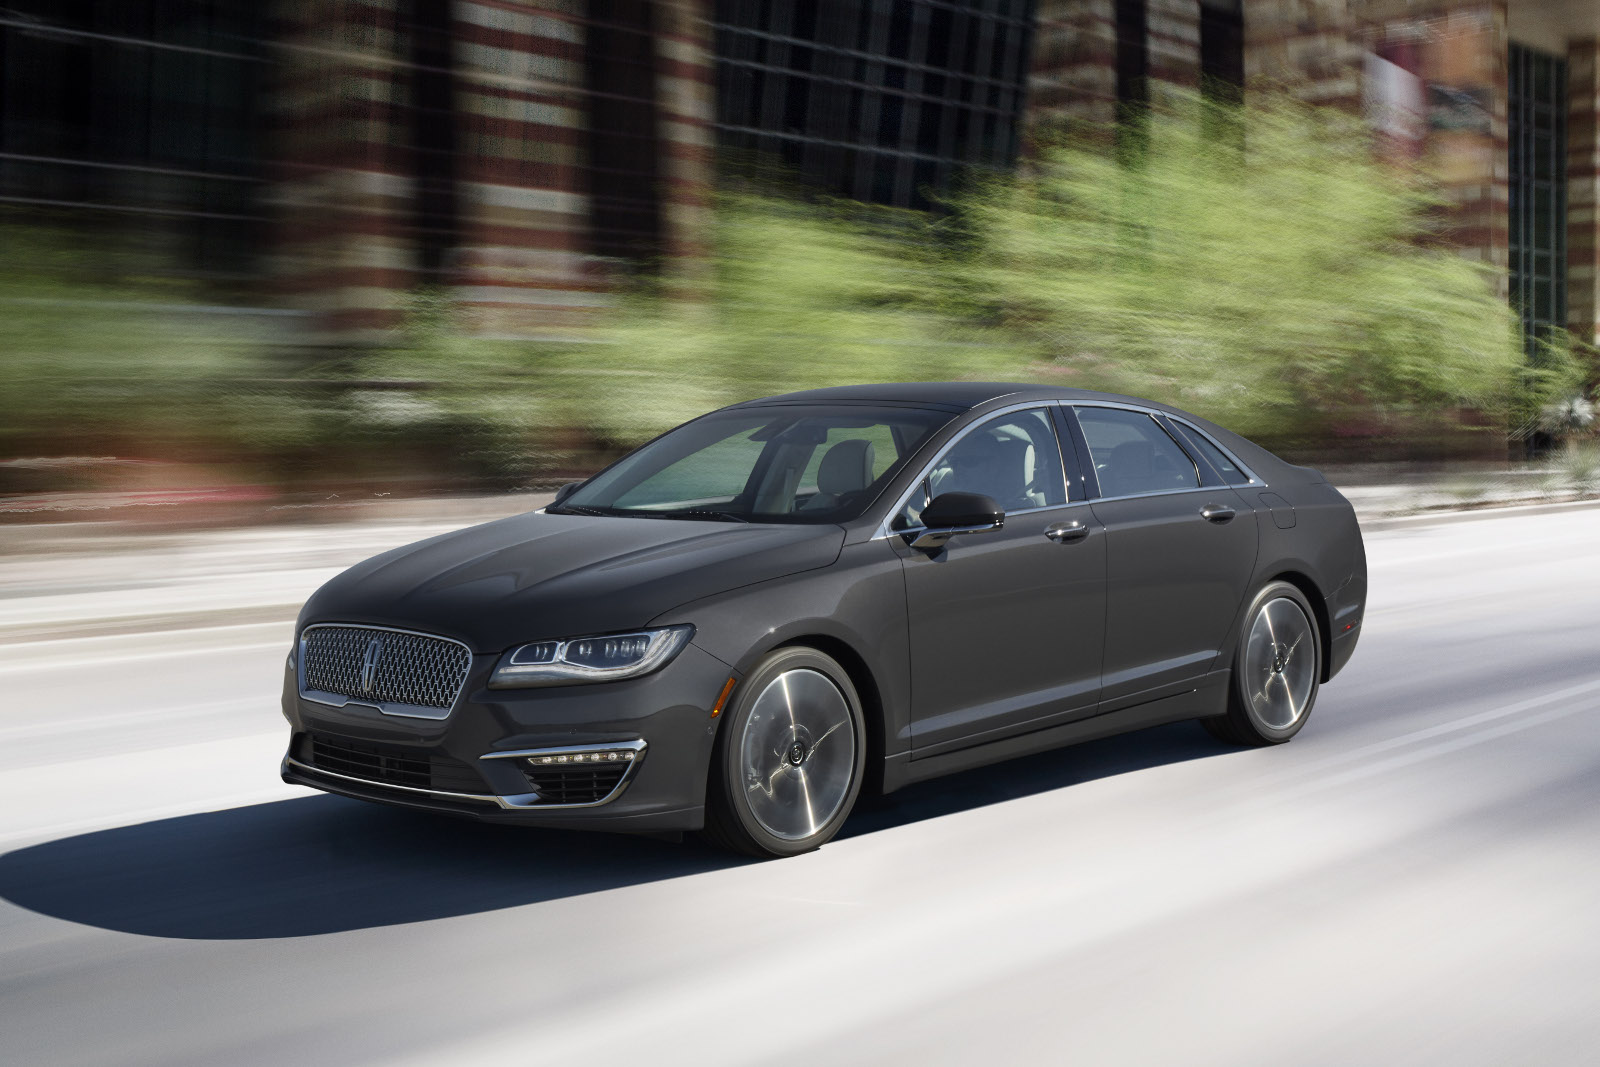 2016 - [Lincoln] MKZ - Page 3 00